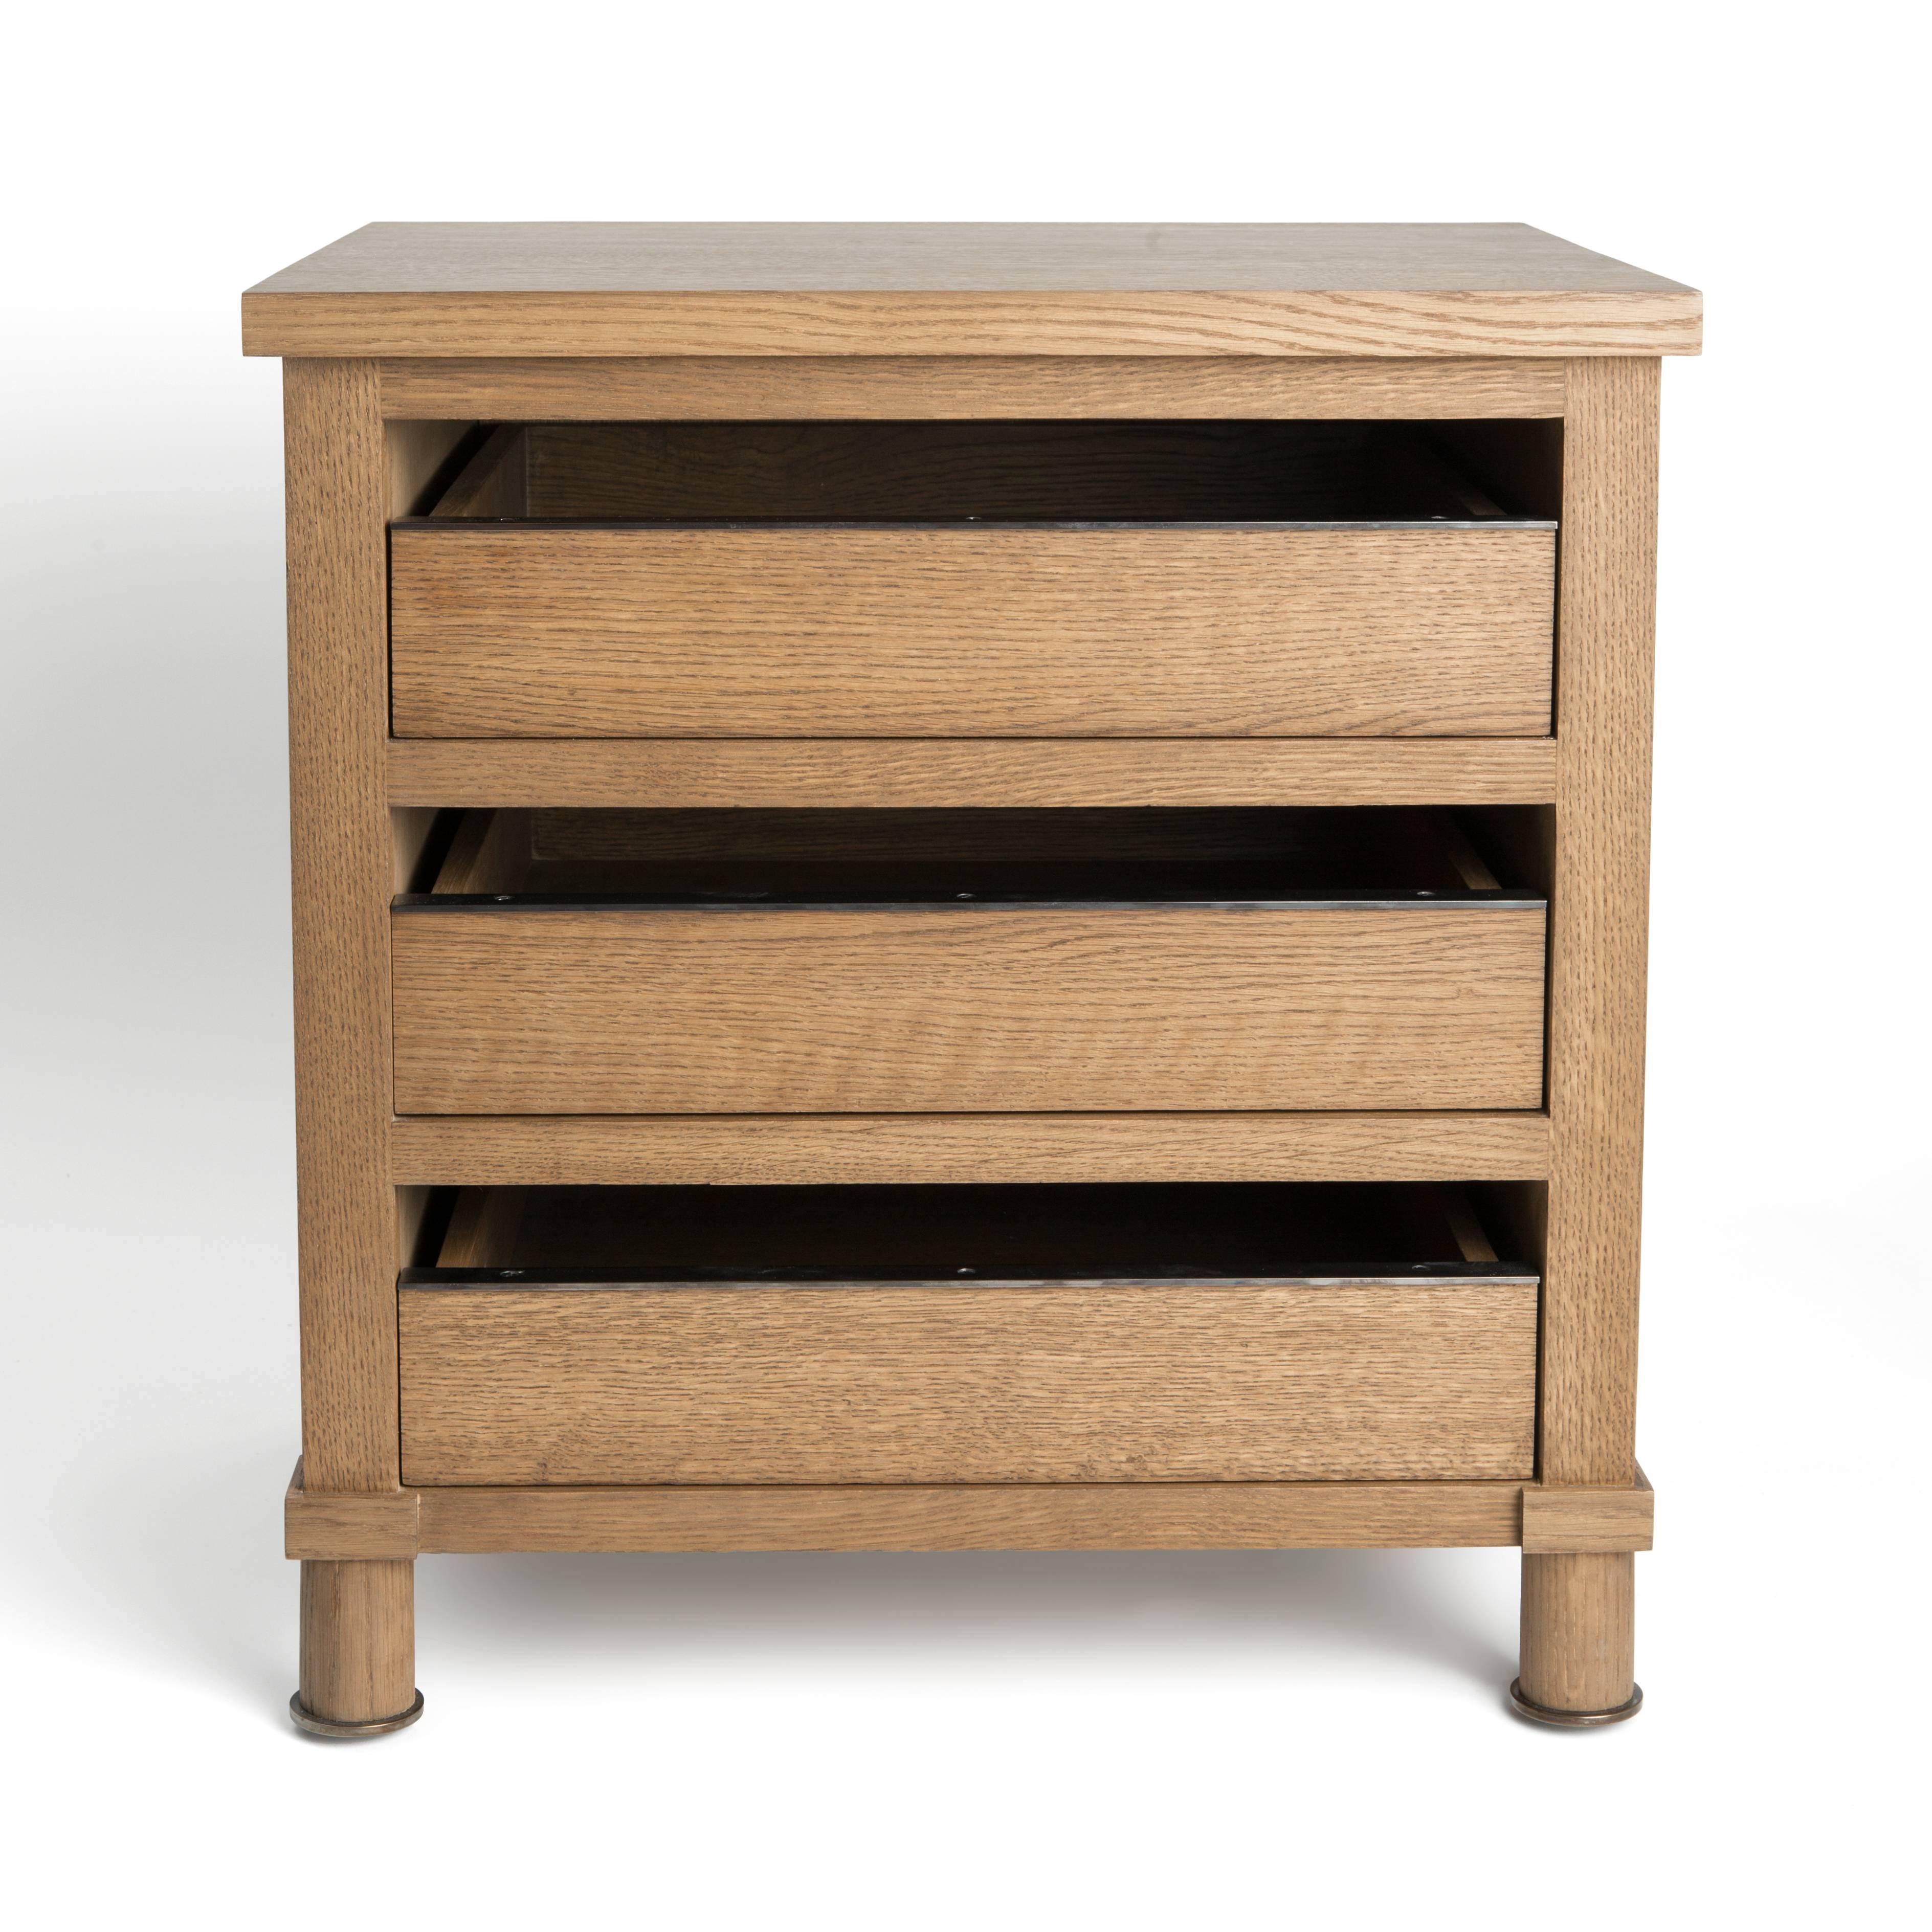 An original Ferrer design with finished oak and bronze details. Functions perfectly as a side table or filing cabinet. Custom sizing and finishes available and quoted upon request. 